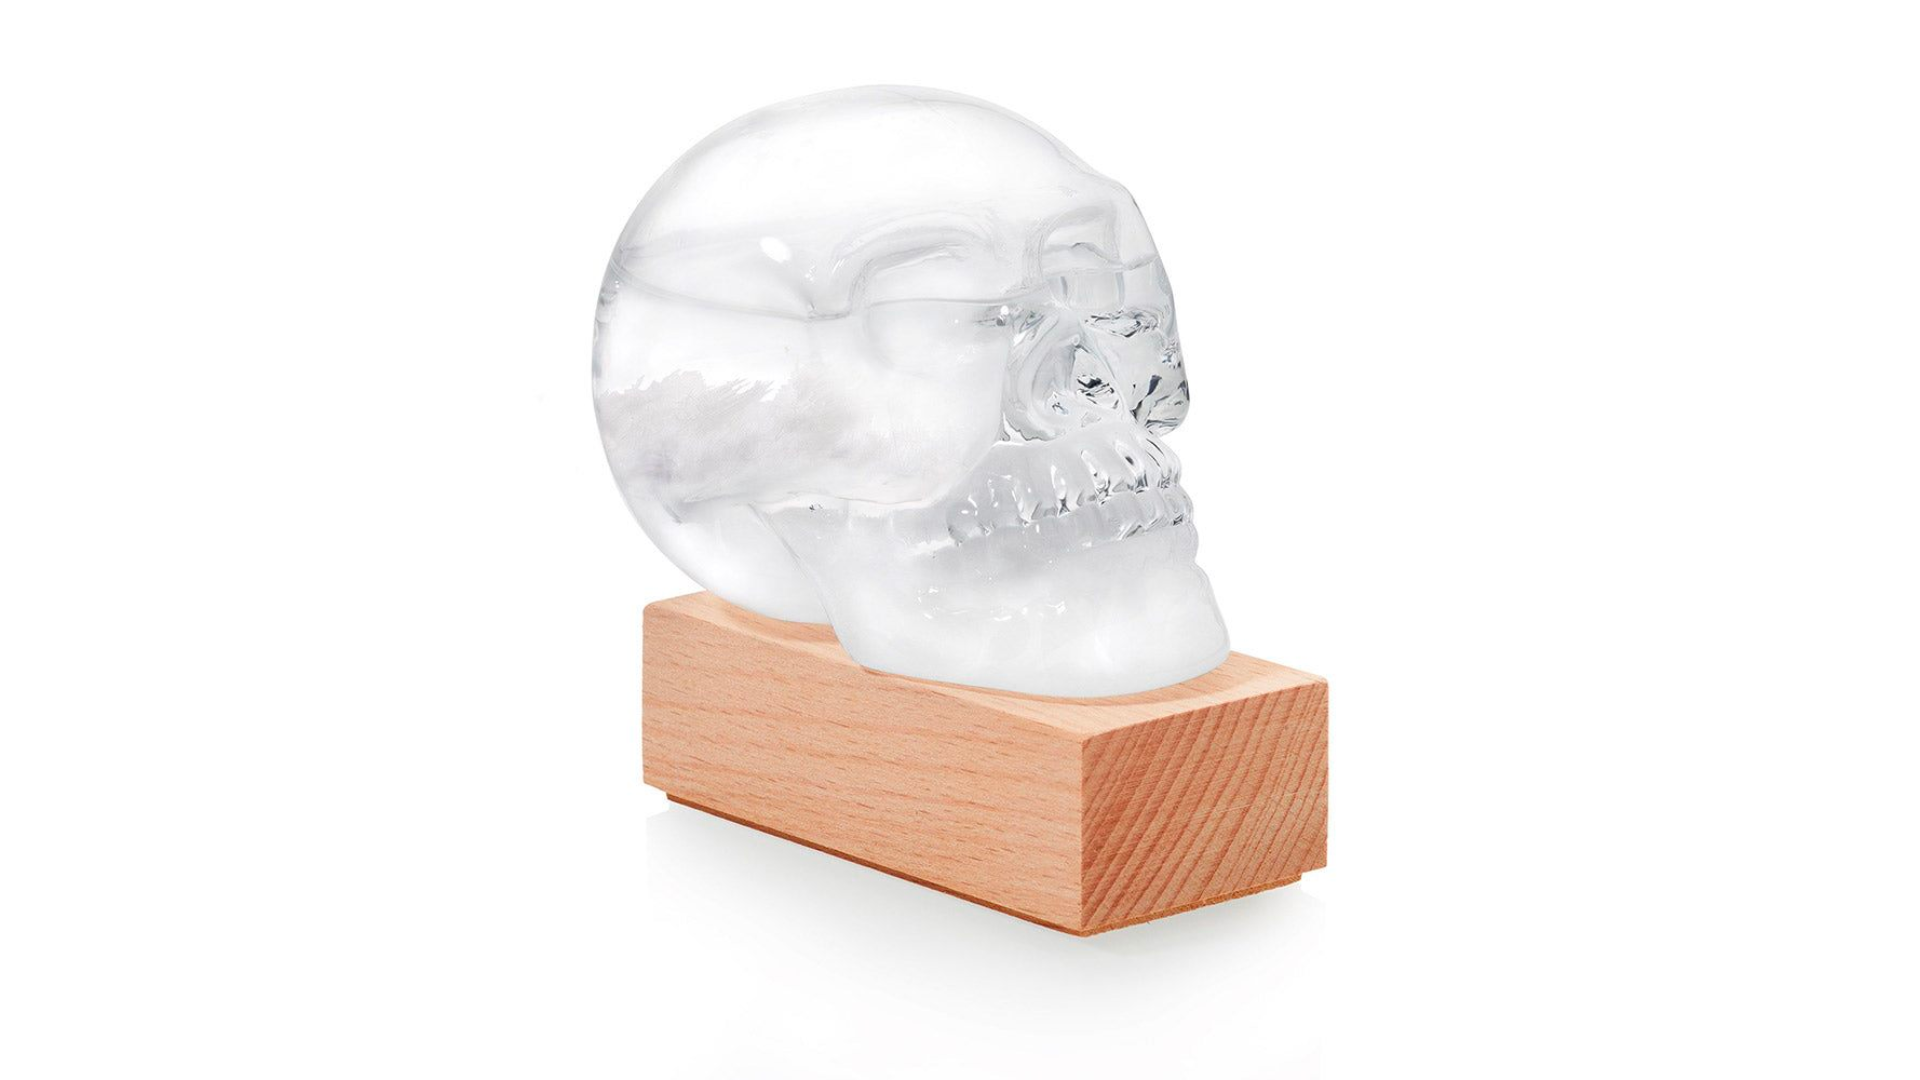 Skull shaped ice cube on a wooden stand.